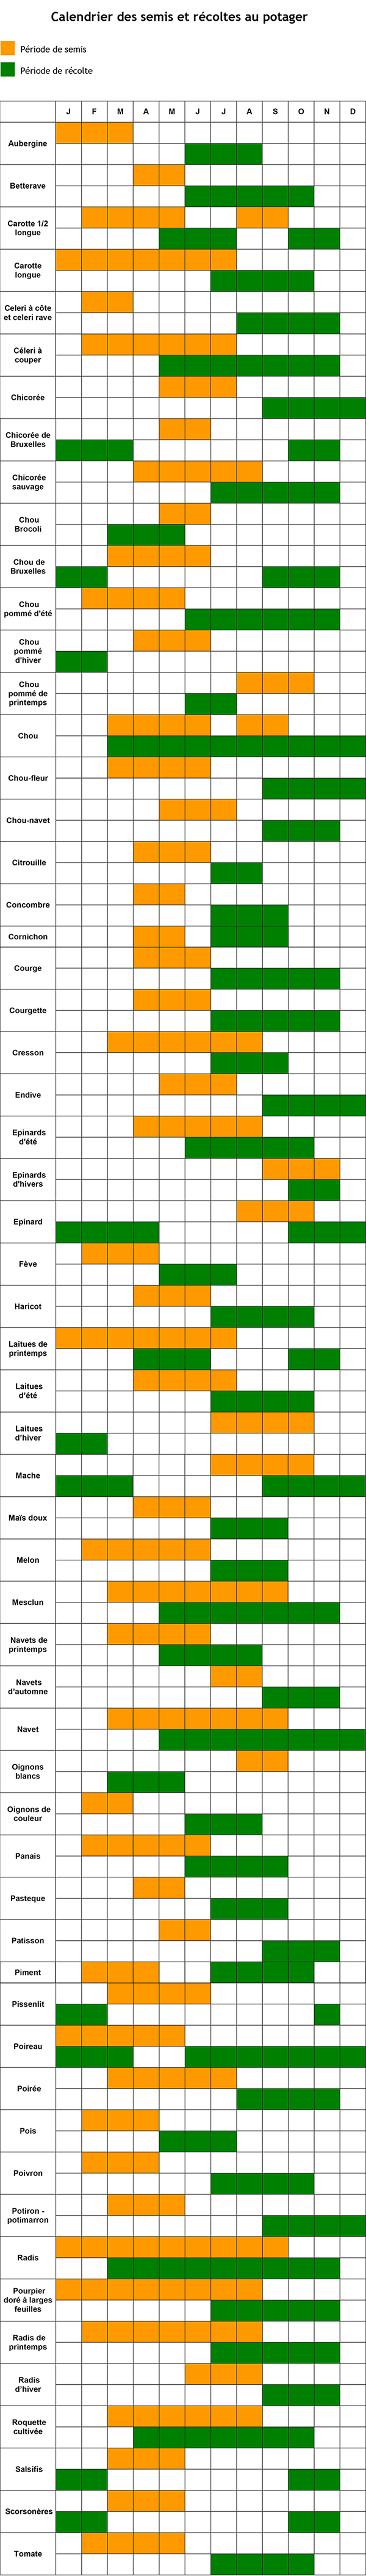 Calendrier-semis-recoltes600px2.png